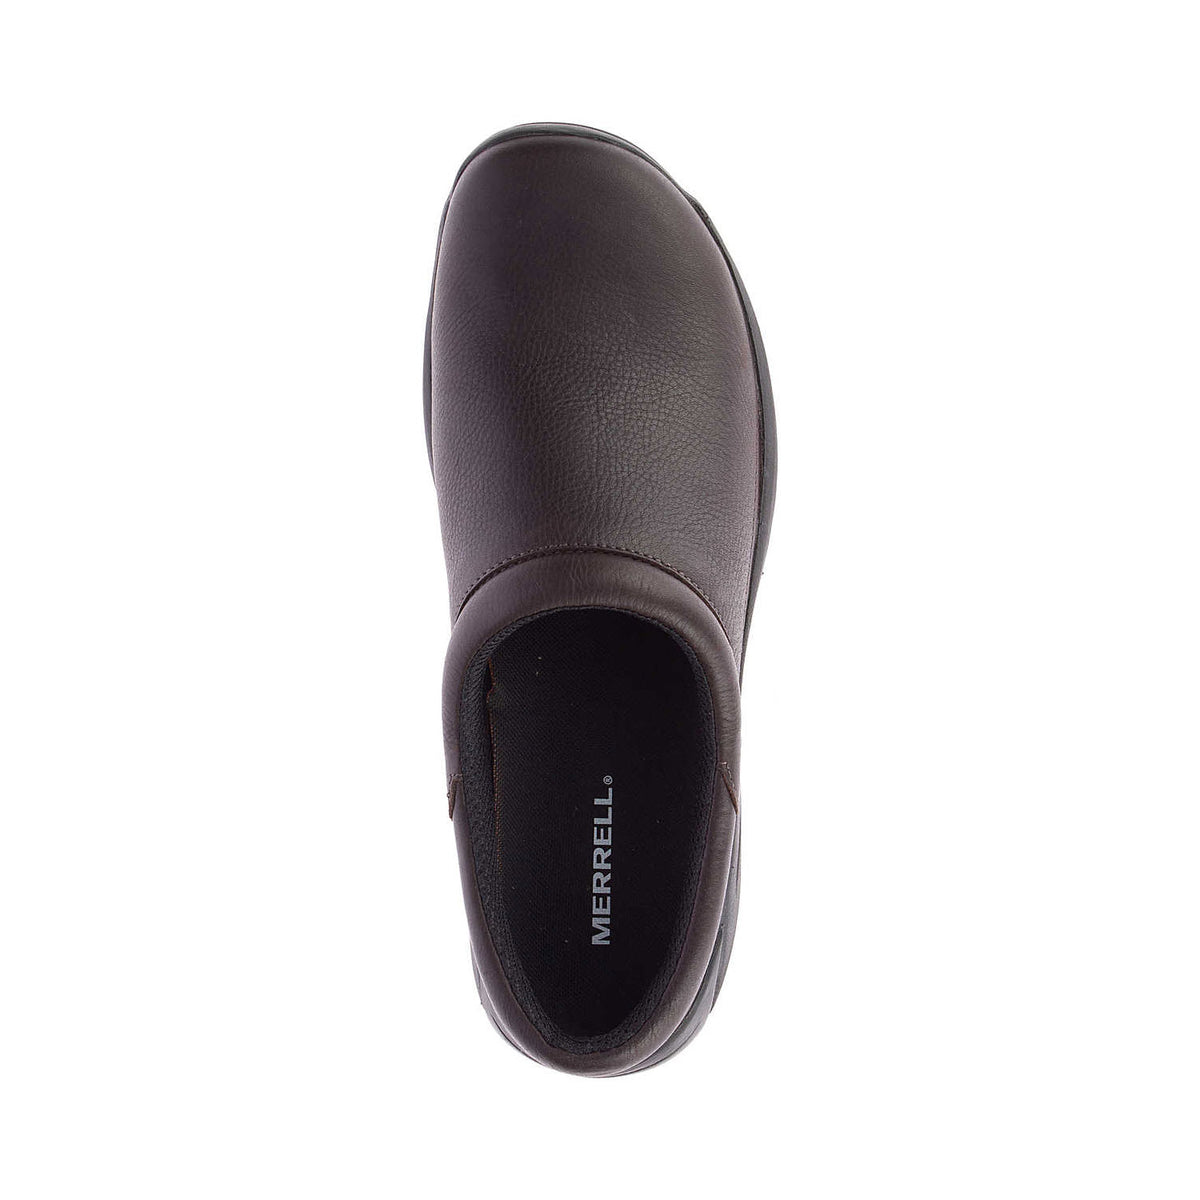 Top view of a single Merrell Encore Gust 2 Espresso Smooth clog on a white background.